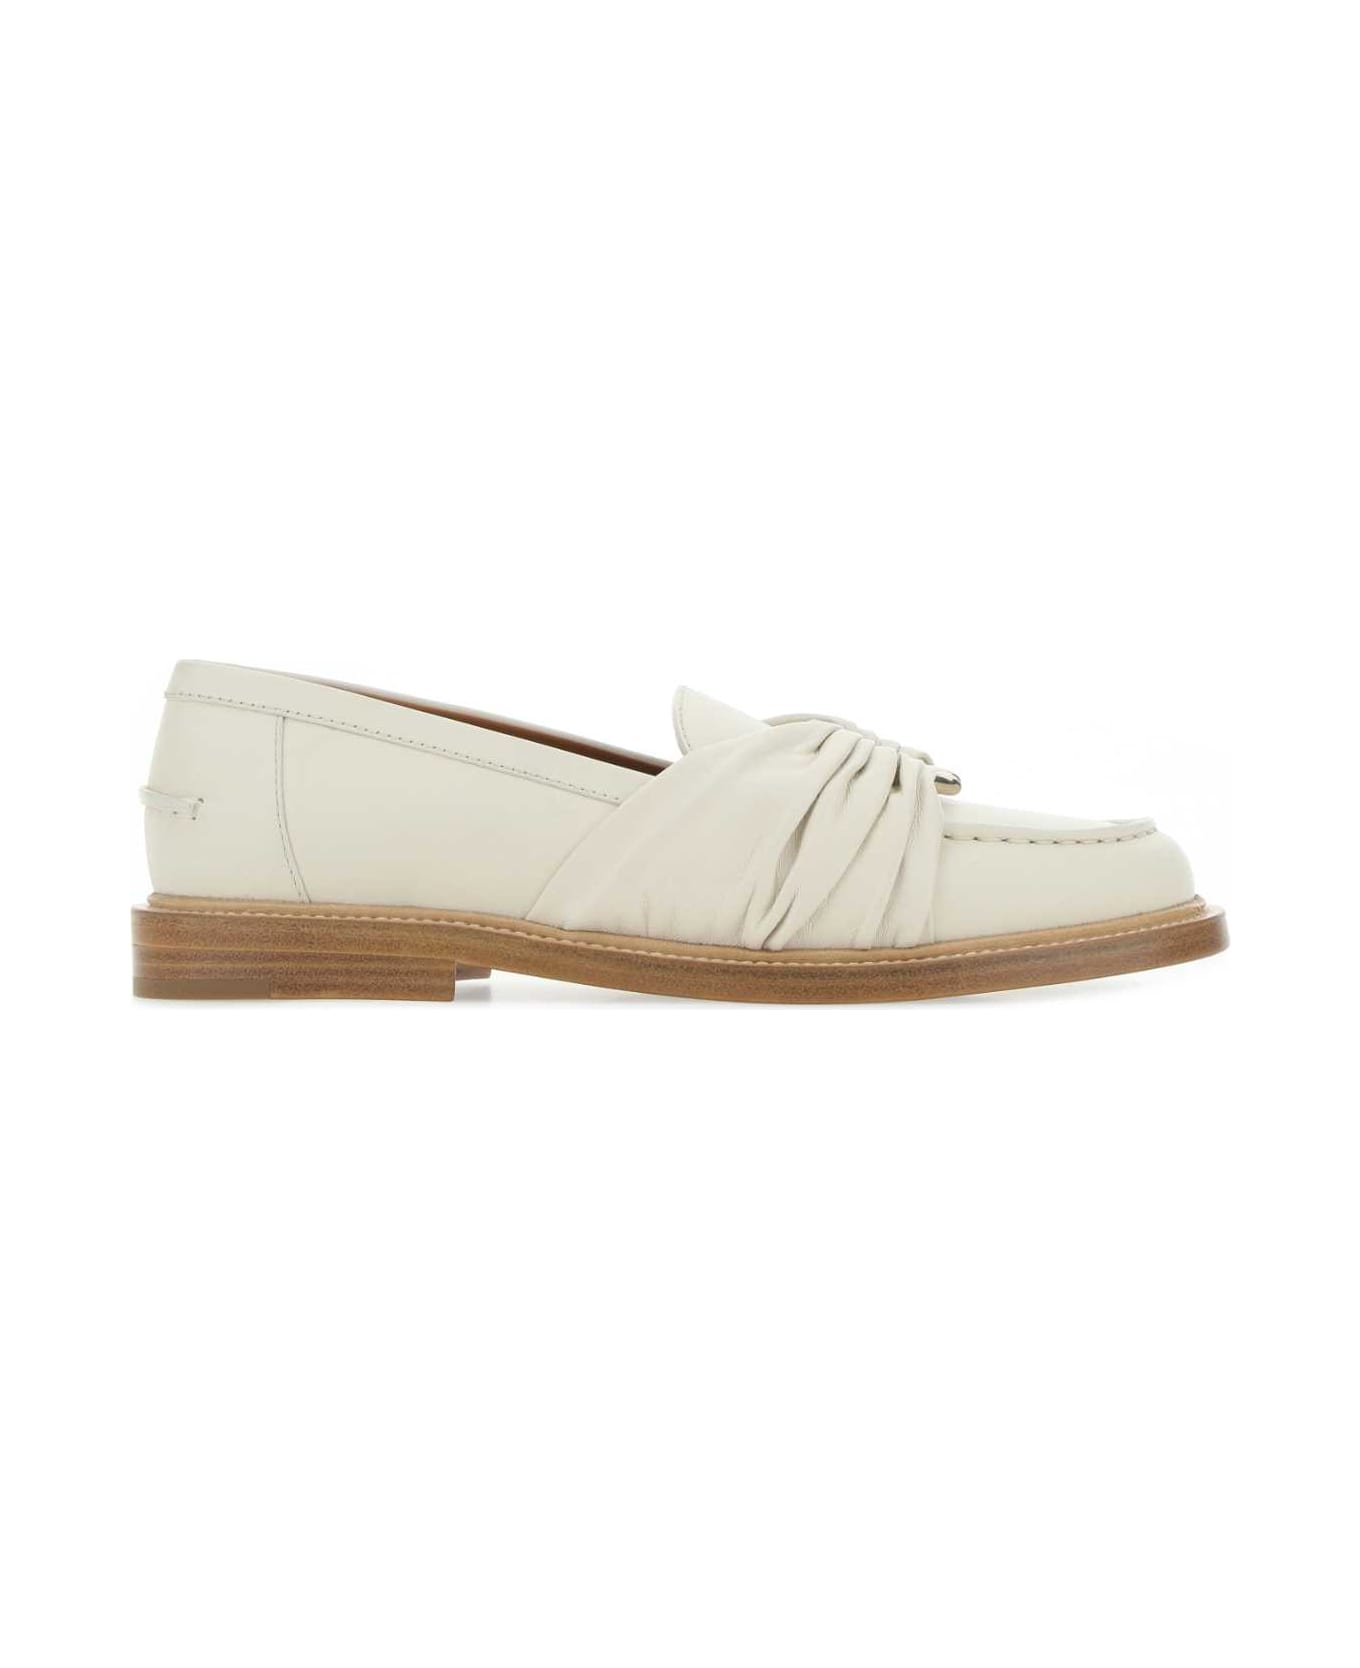 Chloé Ivory Leather Loafers - 122 フラットシューズ